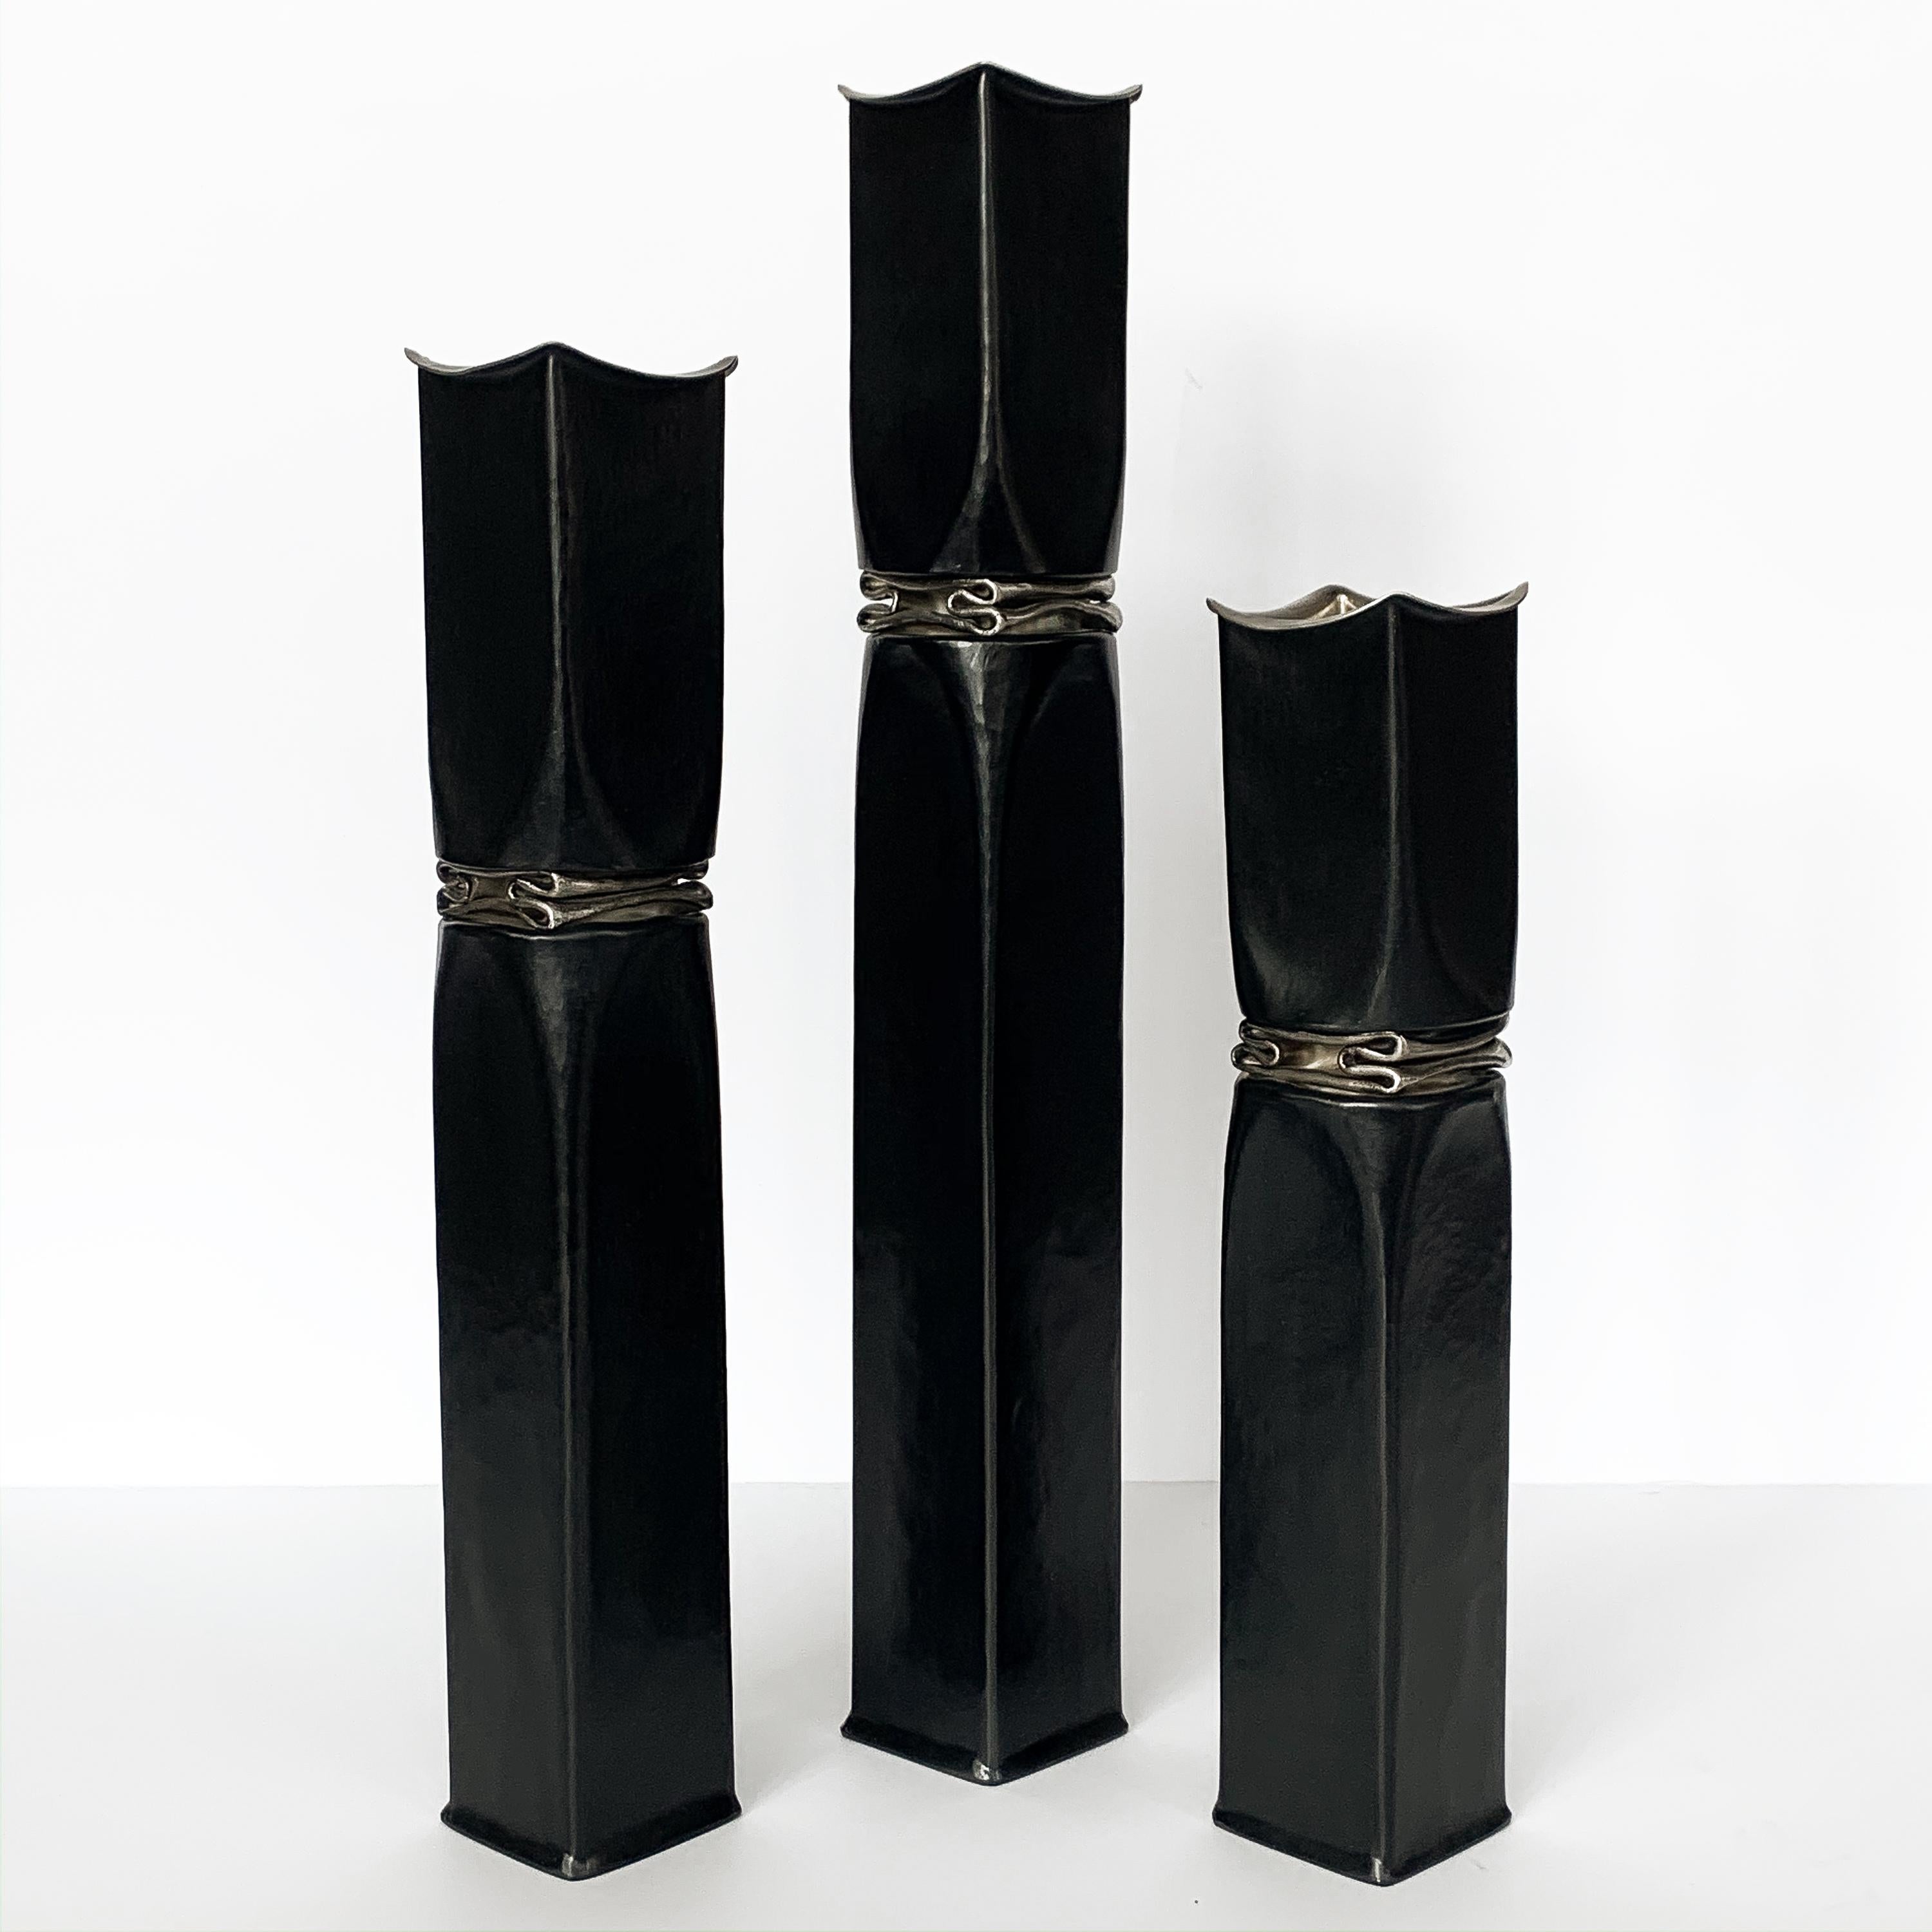 Set of three Thomas Roy Markusen Brutalist black oxidized copper candlesticks. These candle holders or vases feature a black oxidized hammered square copper form with crumbled 